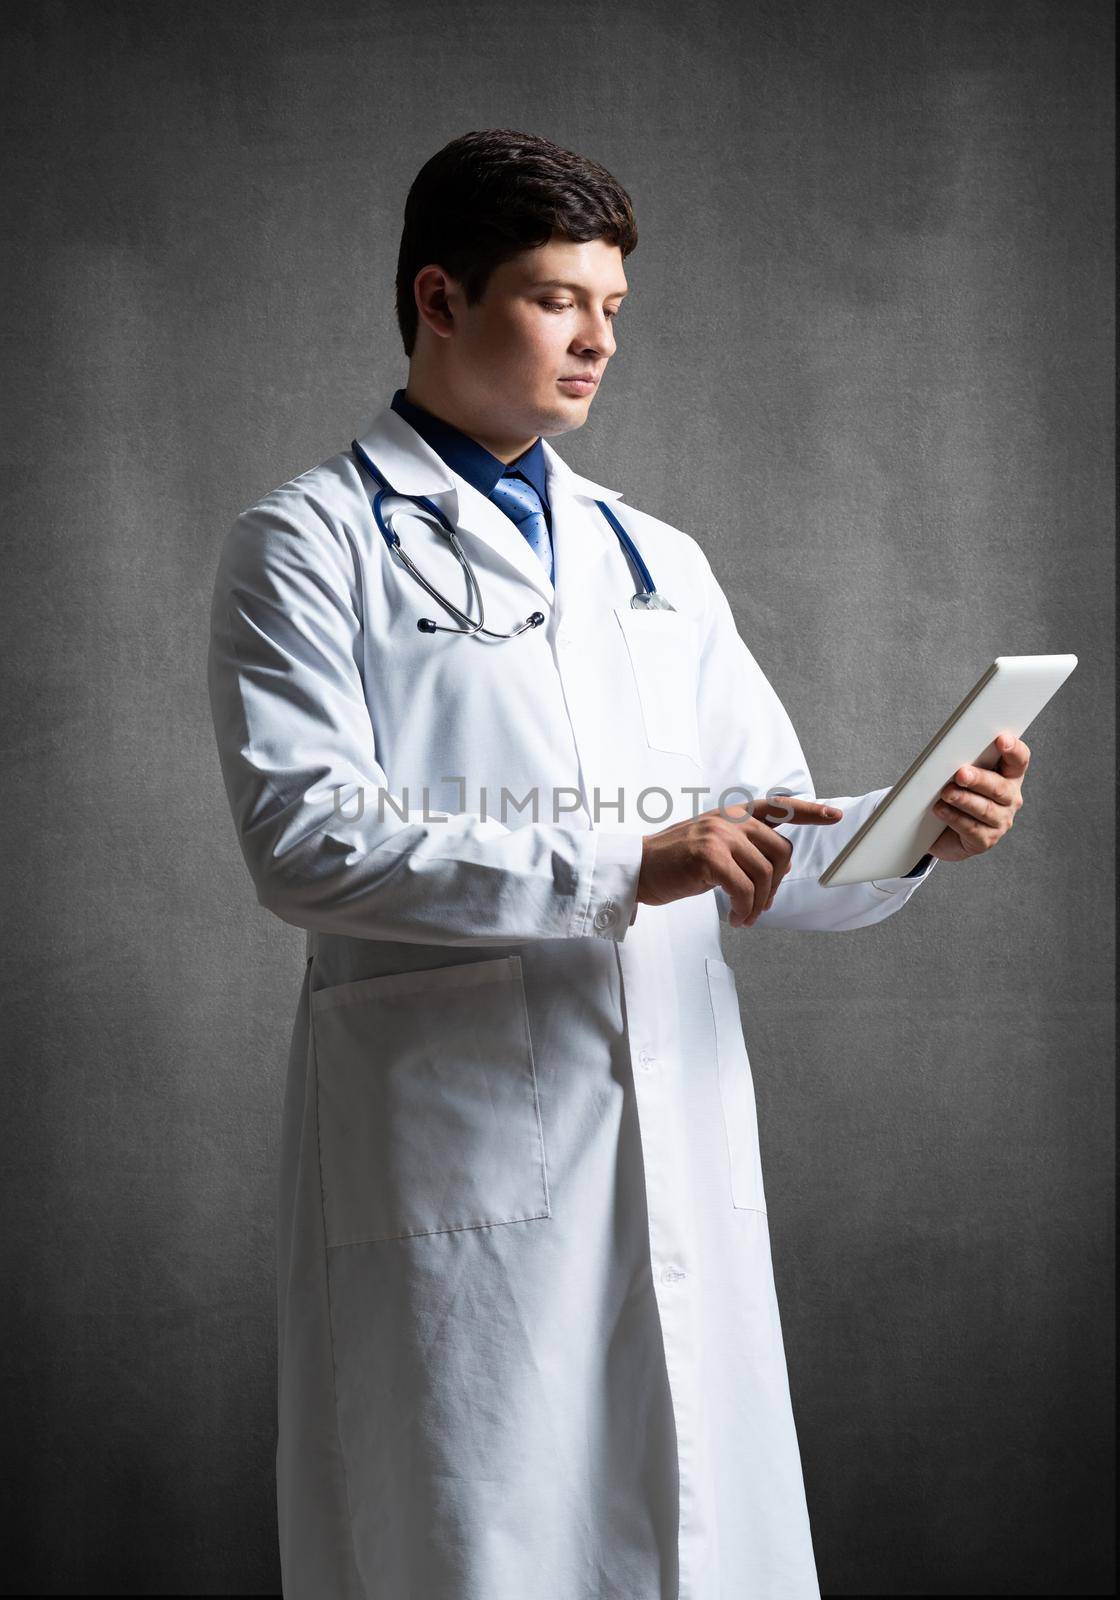 The doctor with the computer tablet. Digital technology in healthcare